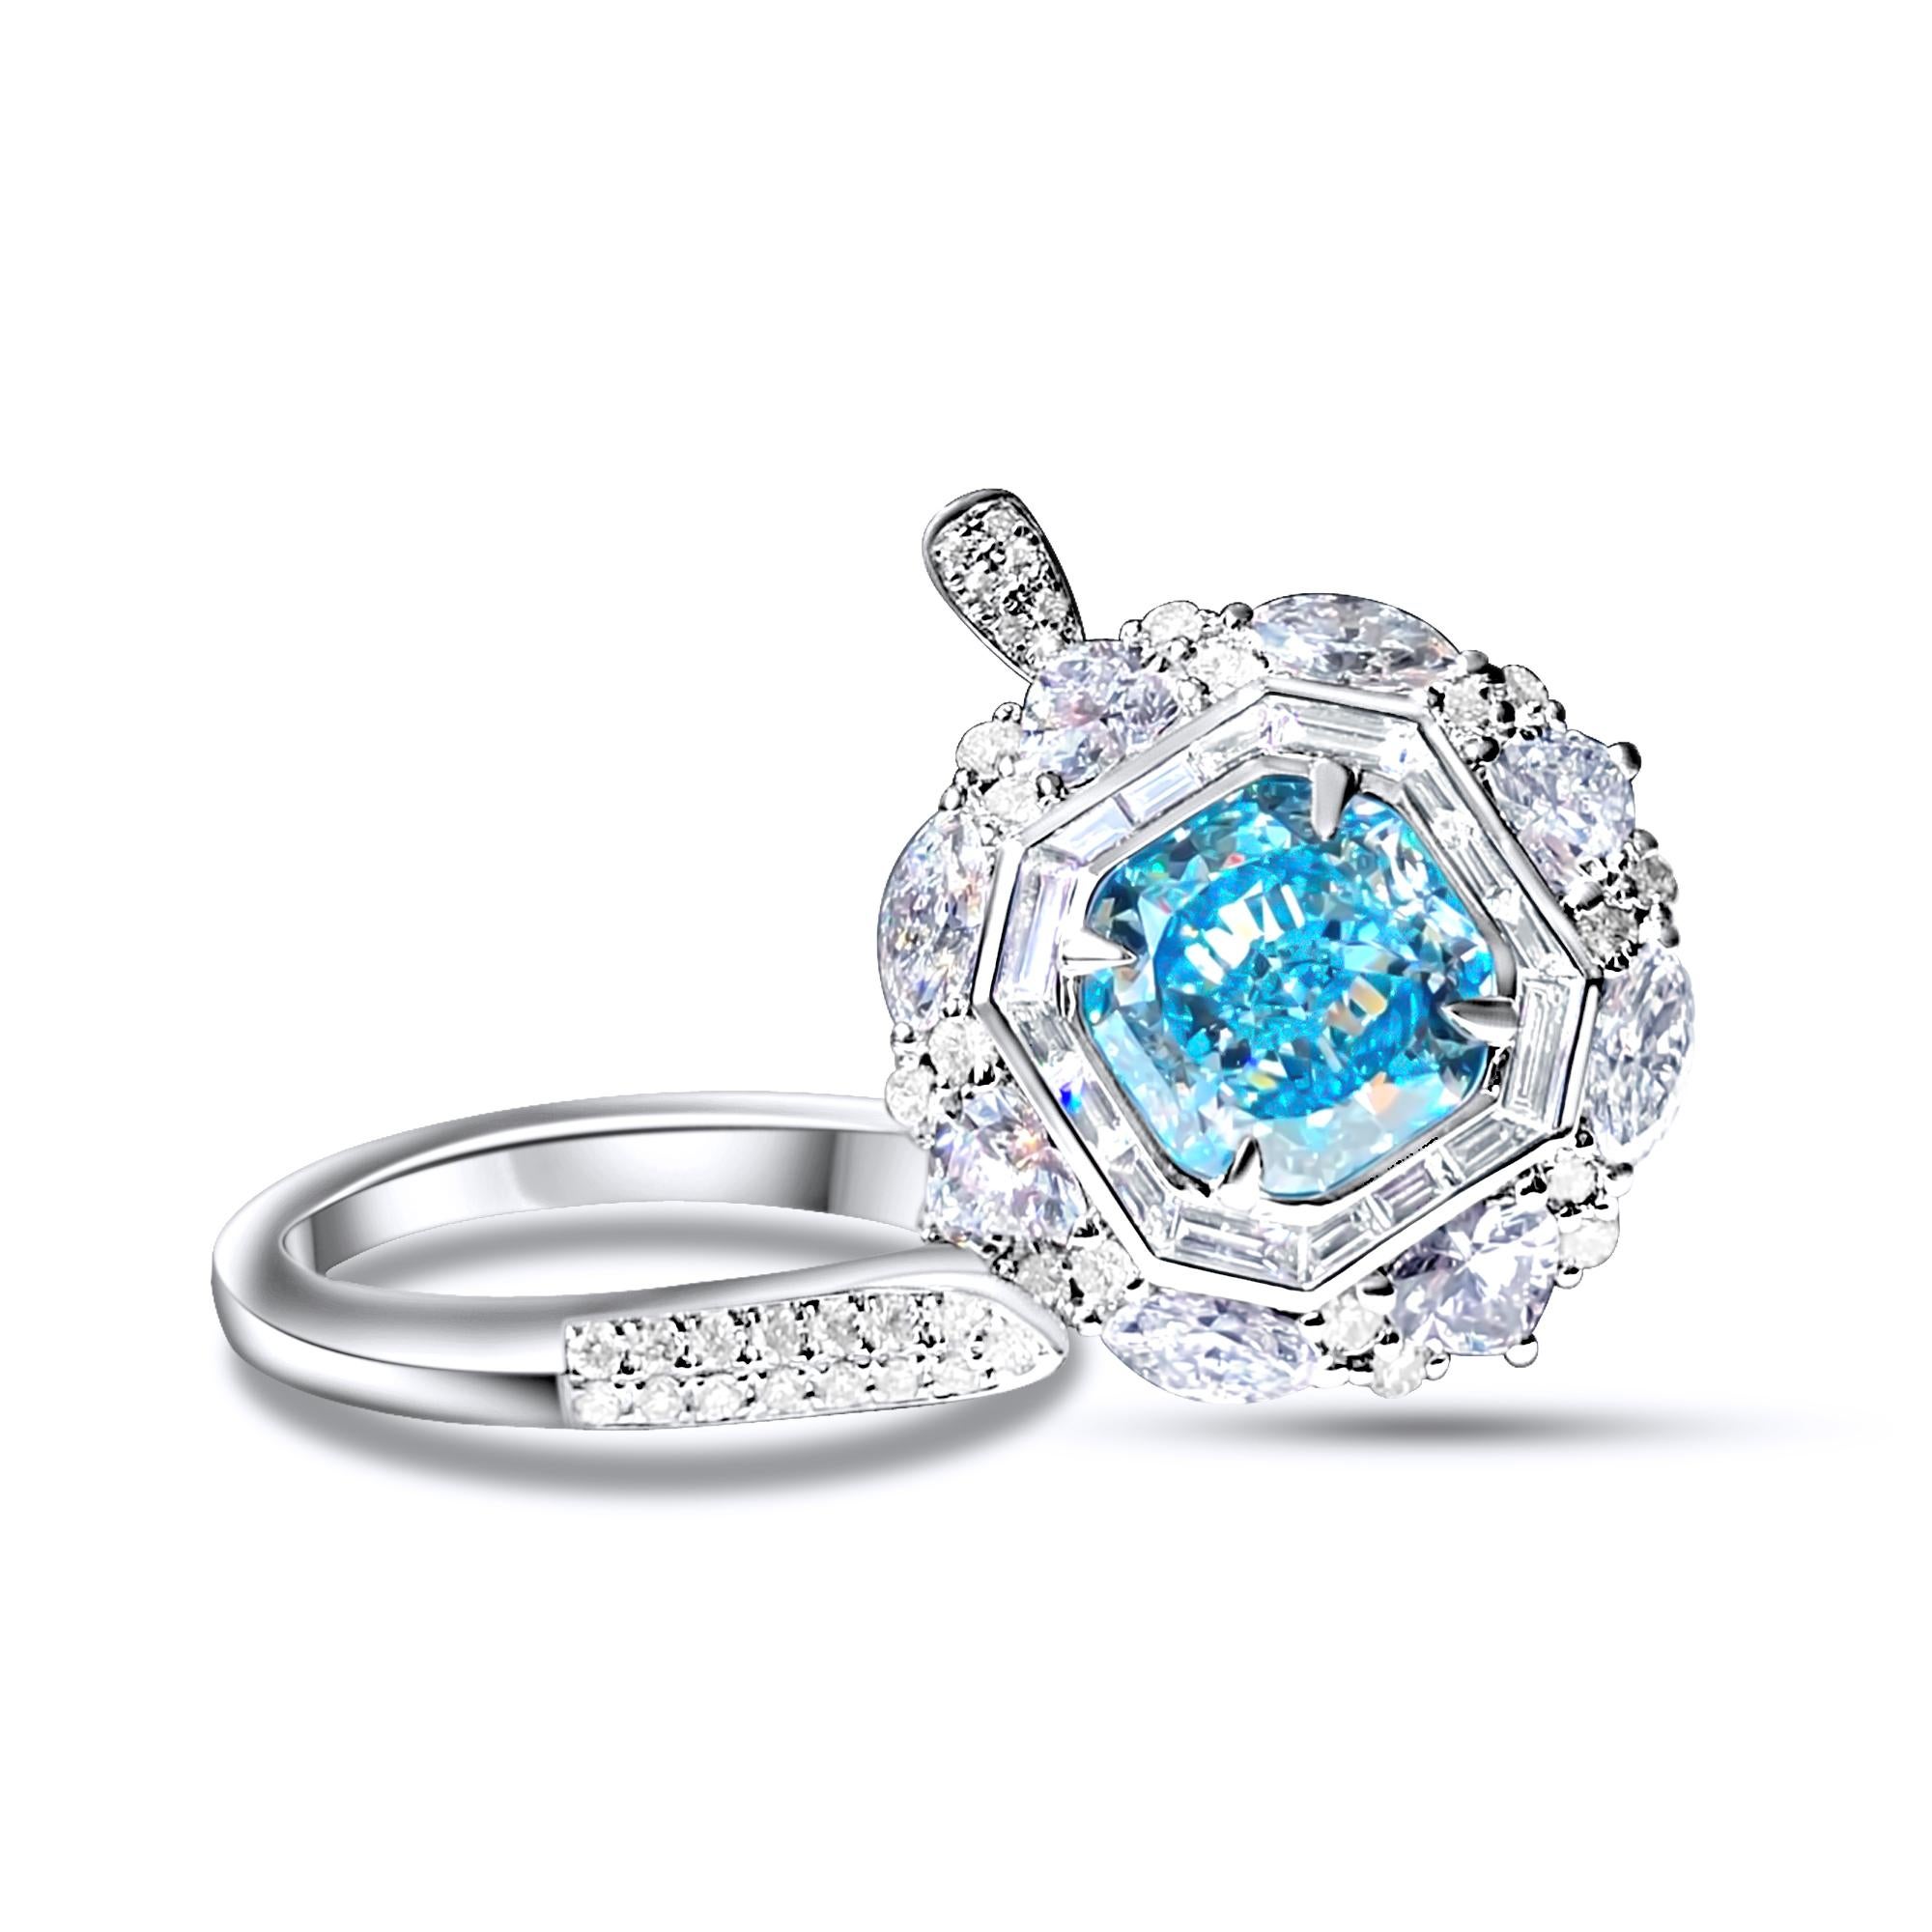 Square Cut 2.29ct GIA Certified Blue Cushion Cut Diamond Cocktail Ring For Sale